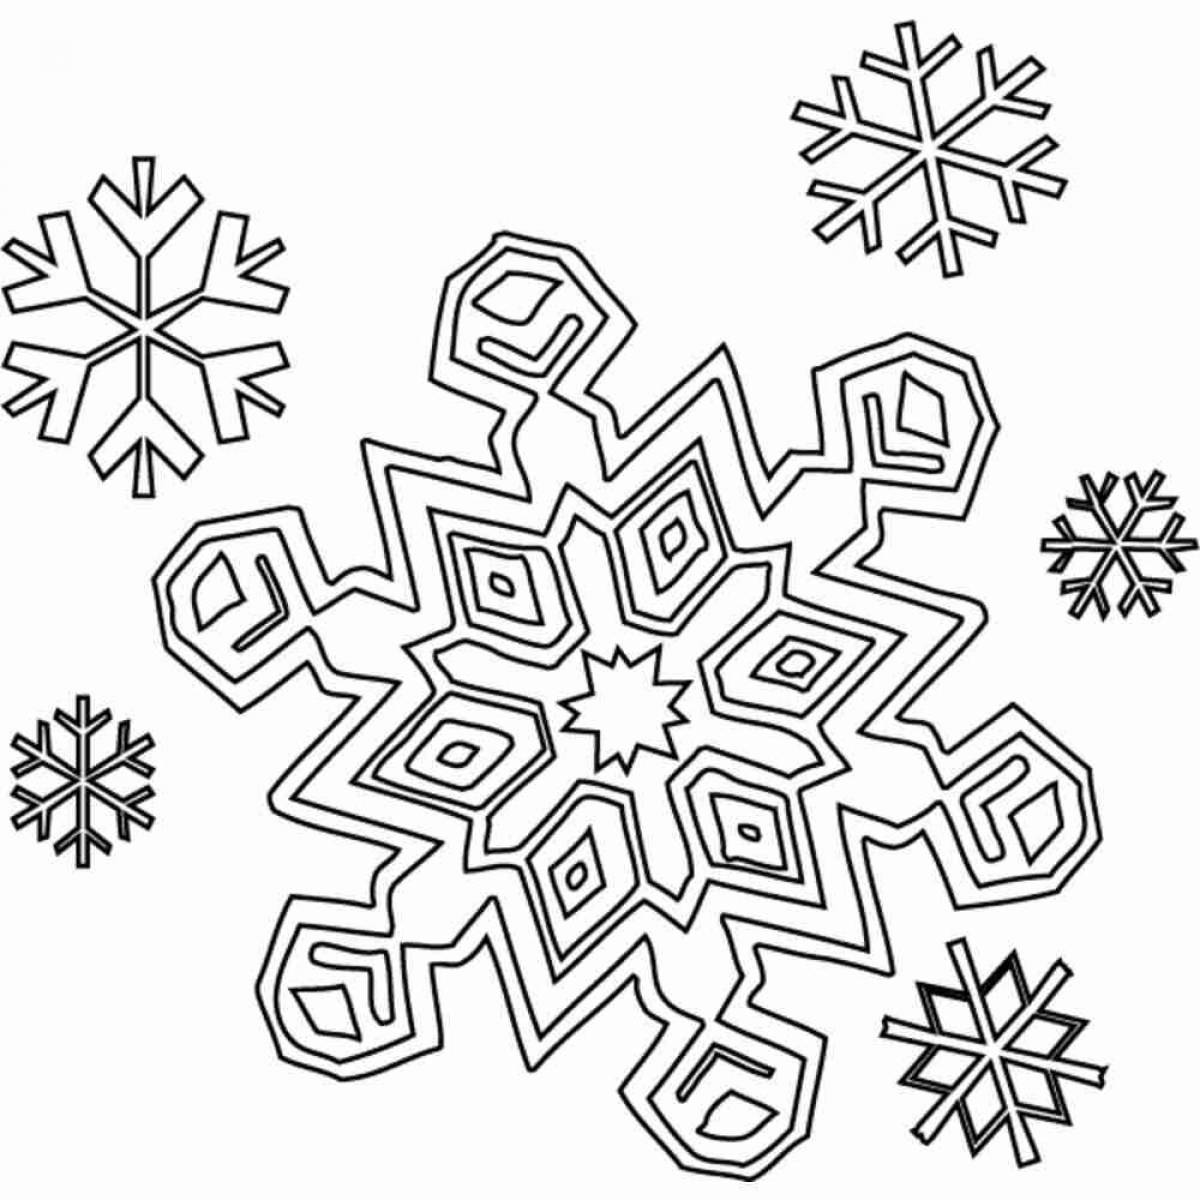 Glittering snowflake coloring book for kids 5-6 years old